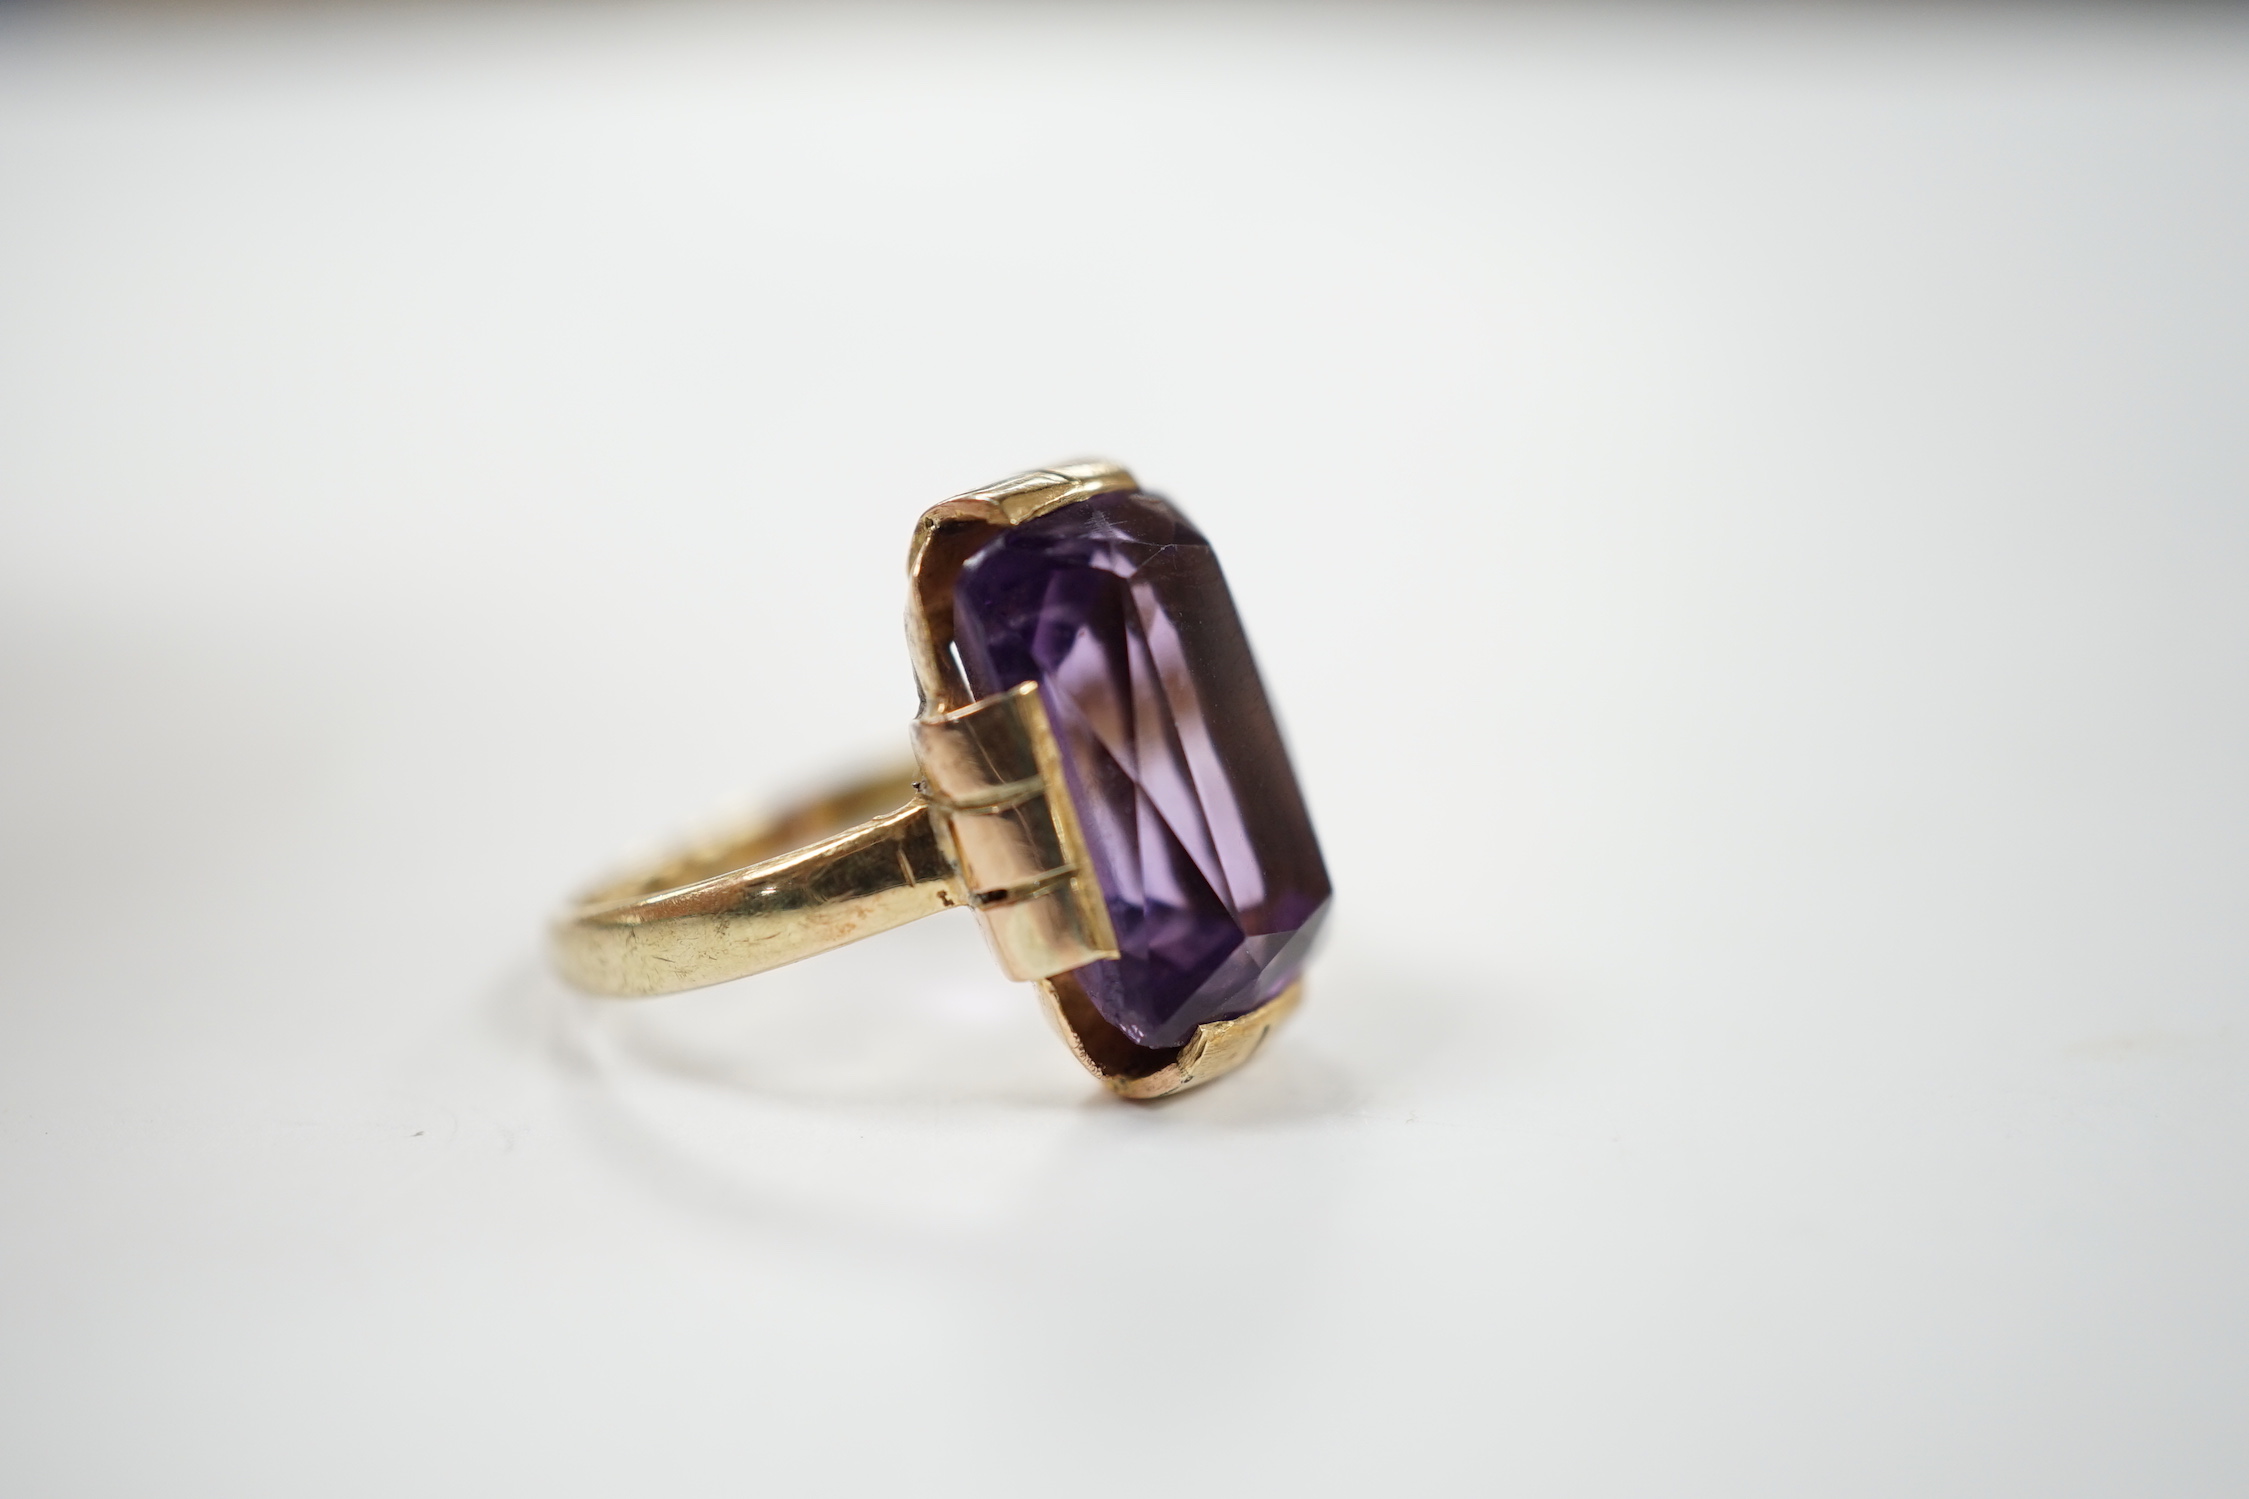 A yellow metal and single stone amethyst set dress ring, size K, gross weight 4.2 grams.